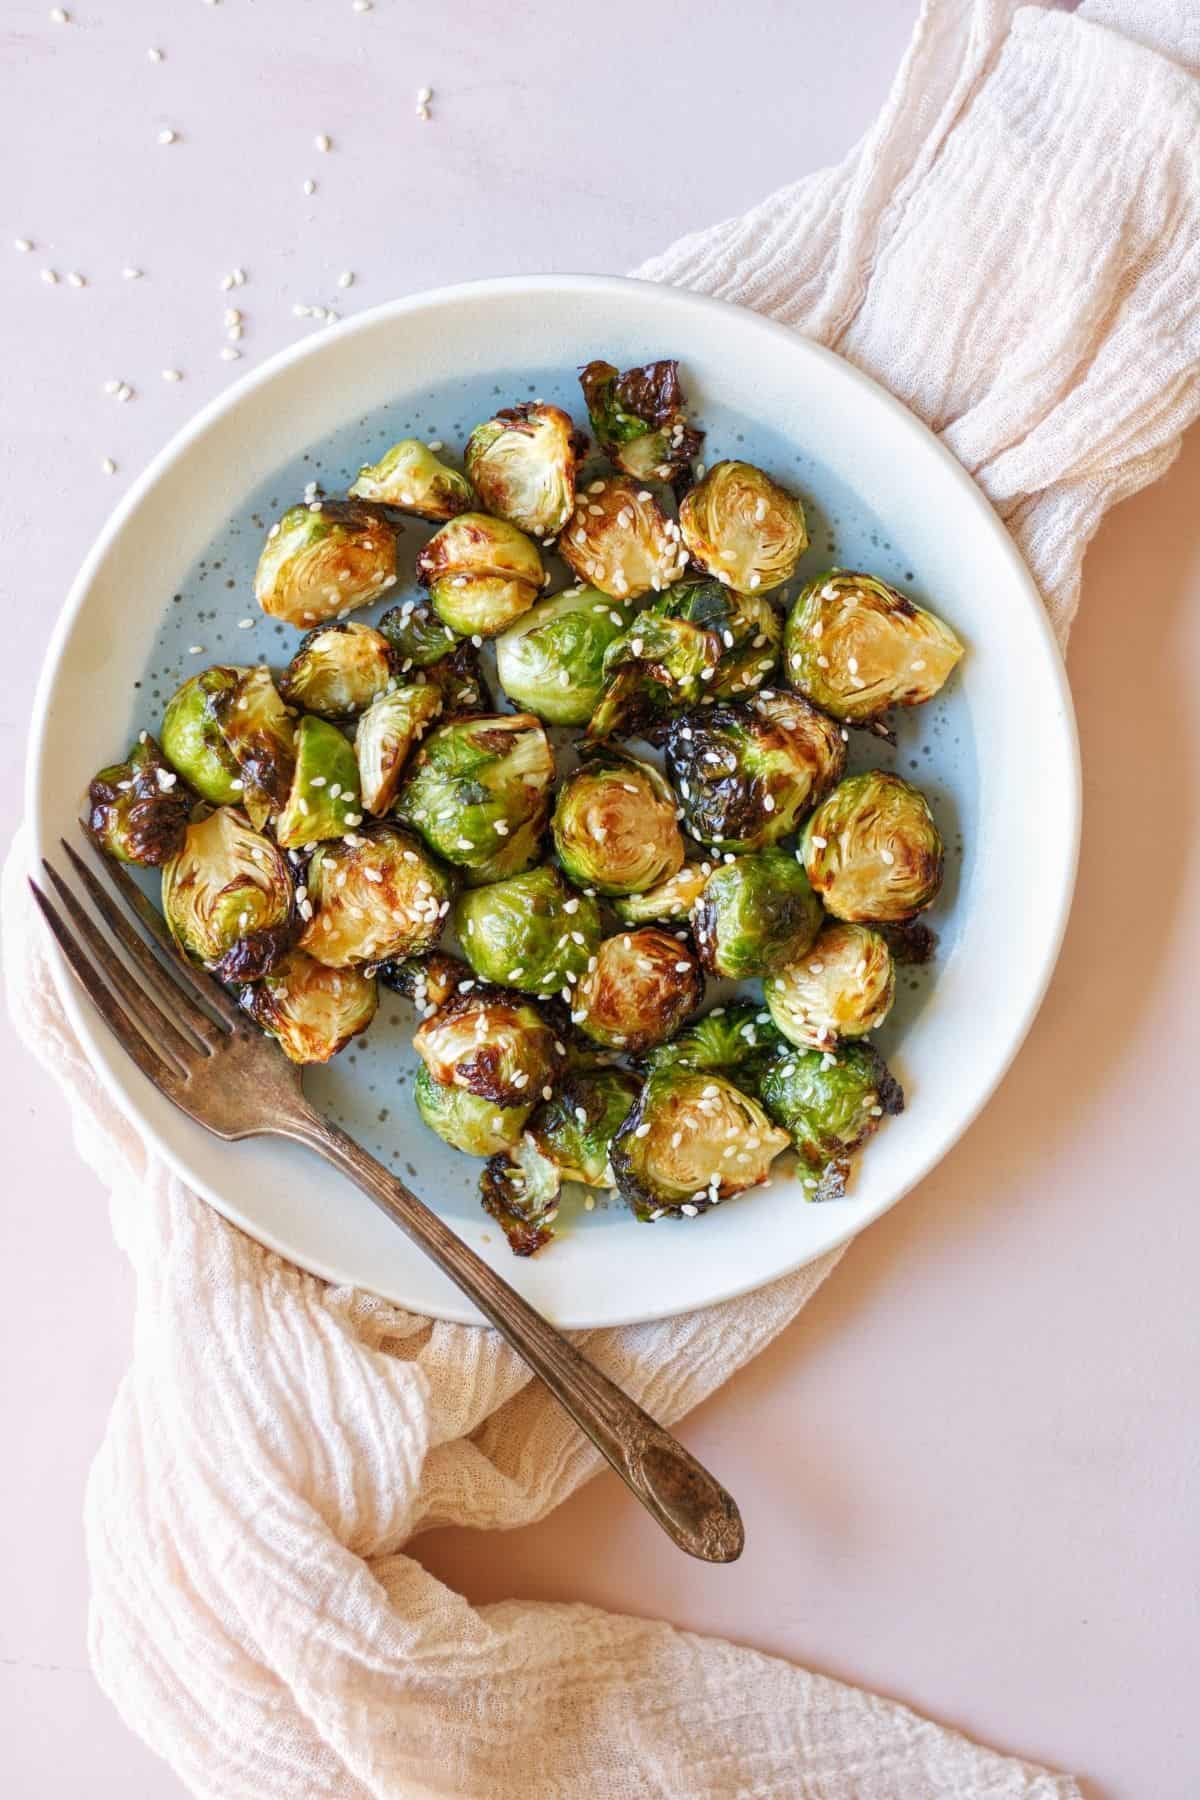 These golden brown and caramelized Brussel Sprouts are crispy, juicy, and bursting with flavor.